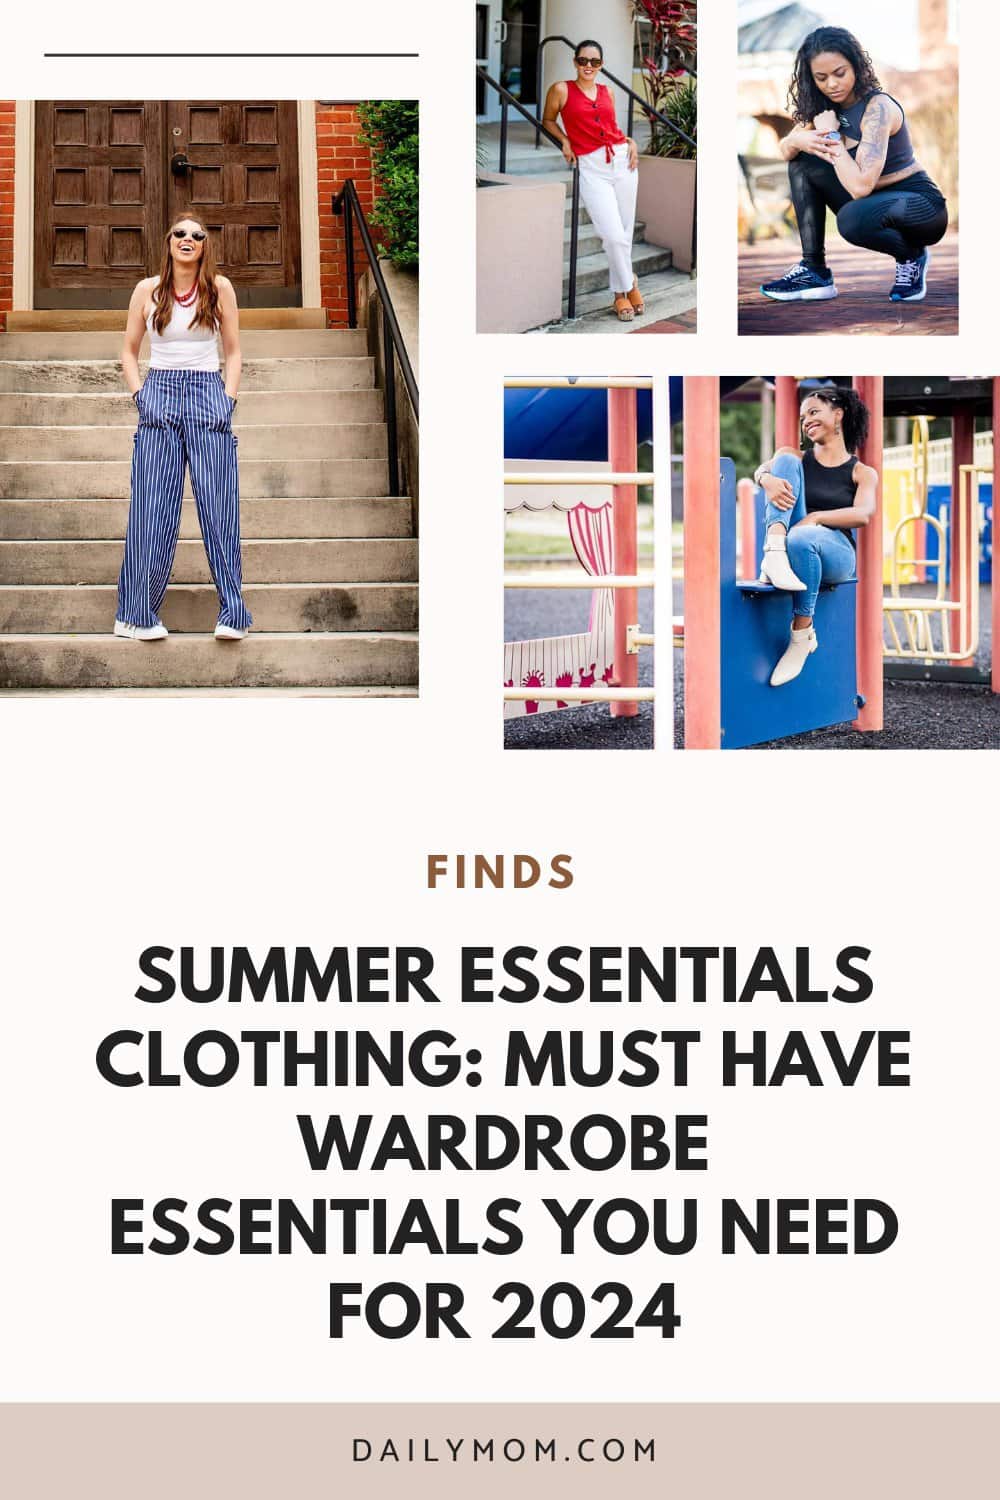 Summer Essentials Clothing: Must Have Wardrobe Essentials You Need For 2024 171 Daily Mom, Magazine For Families